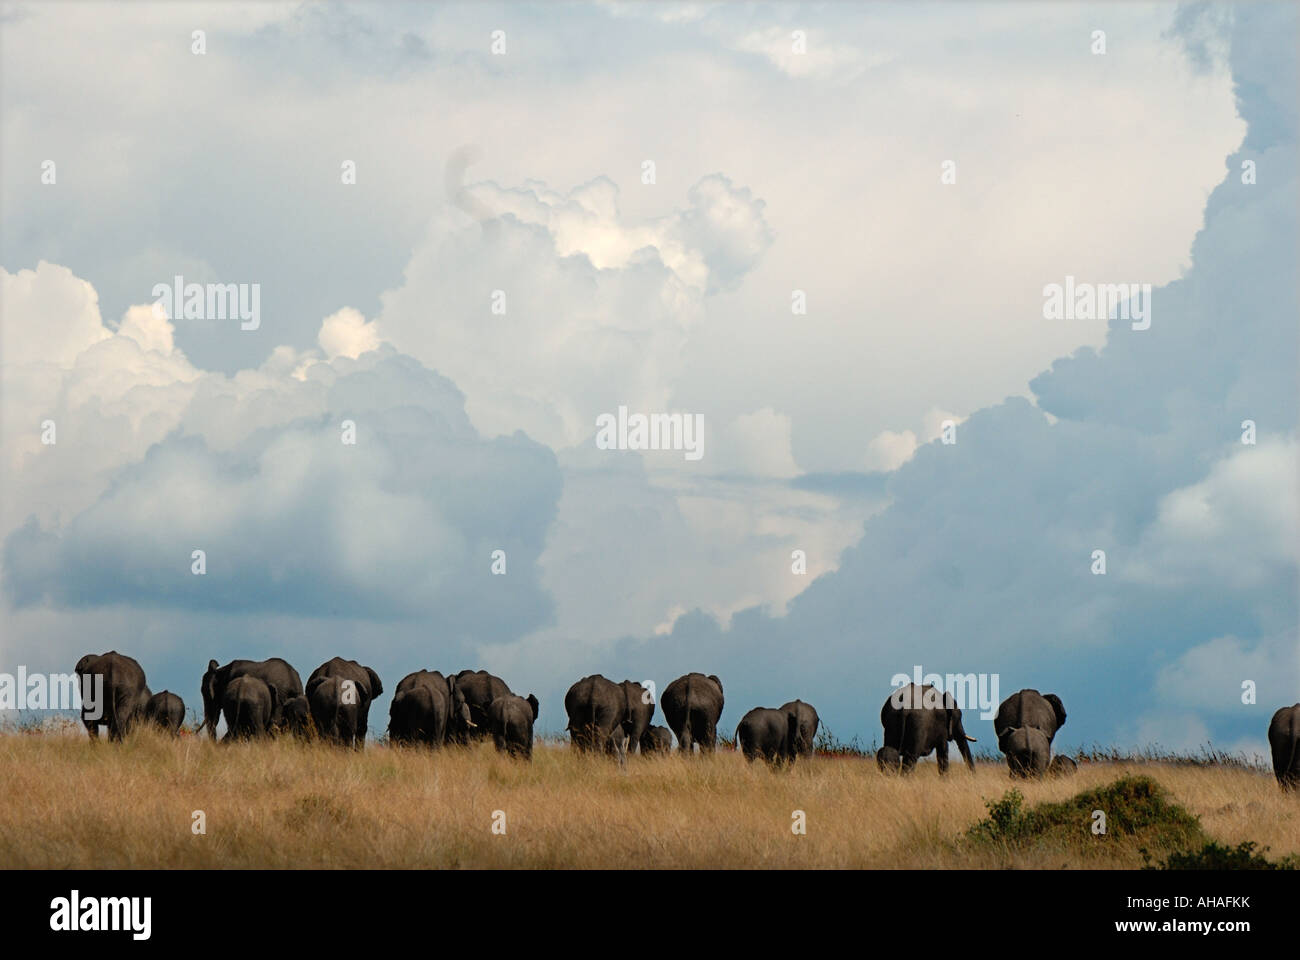 Elephant herd silhouetted against the sky in the Masai Mara National Reserve Kenya East Africa Stock Photo